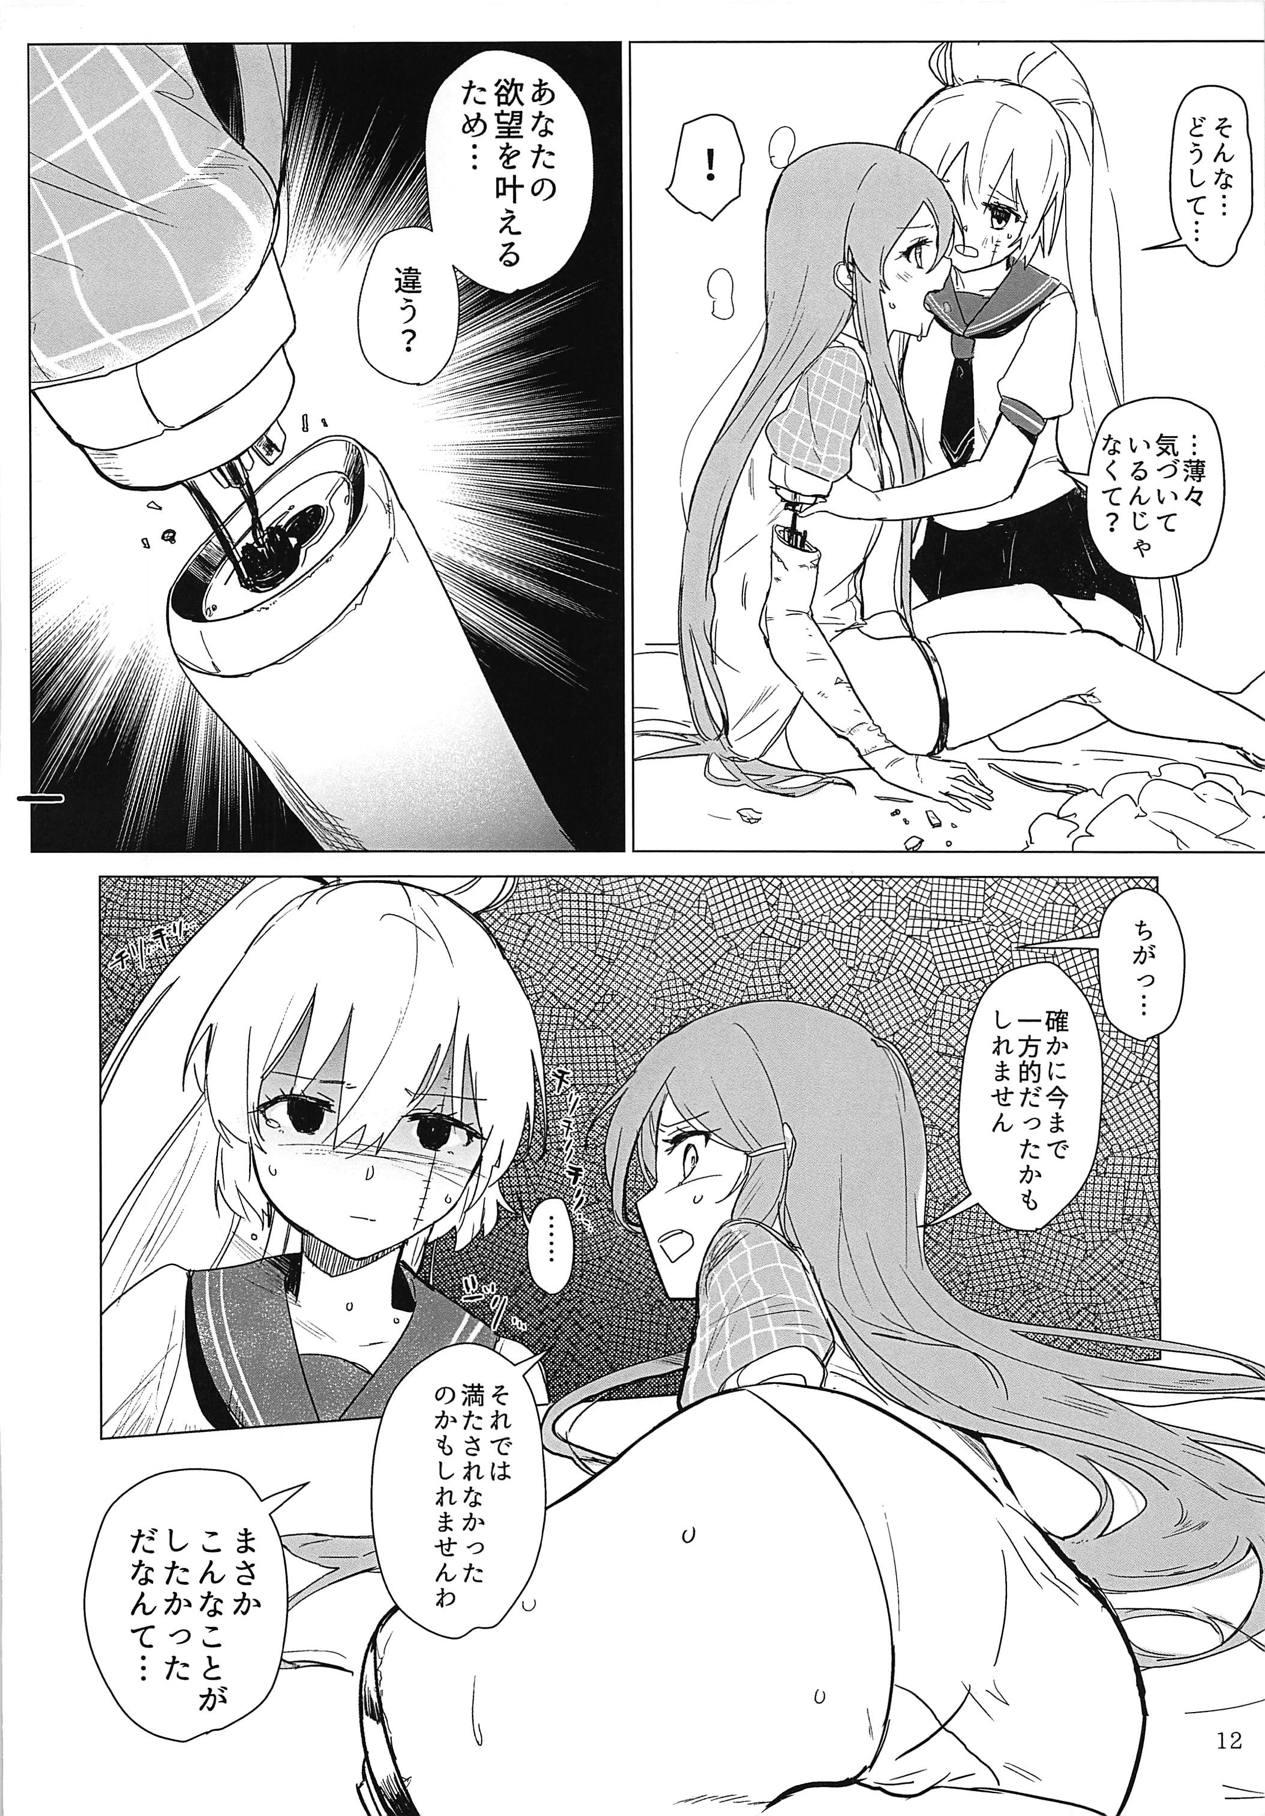 18 Porn Sweet Poison in Noble Blend - Akuma no riddle Dancing - Page 11